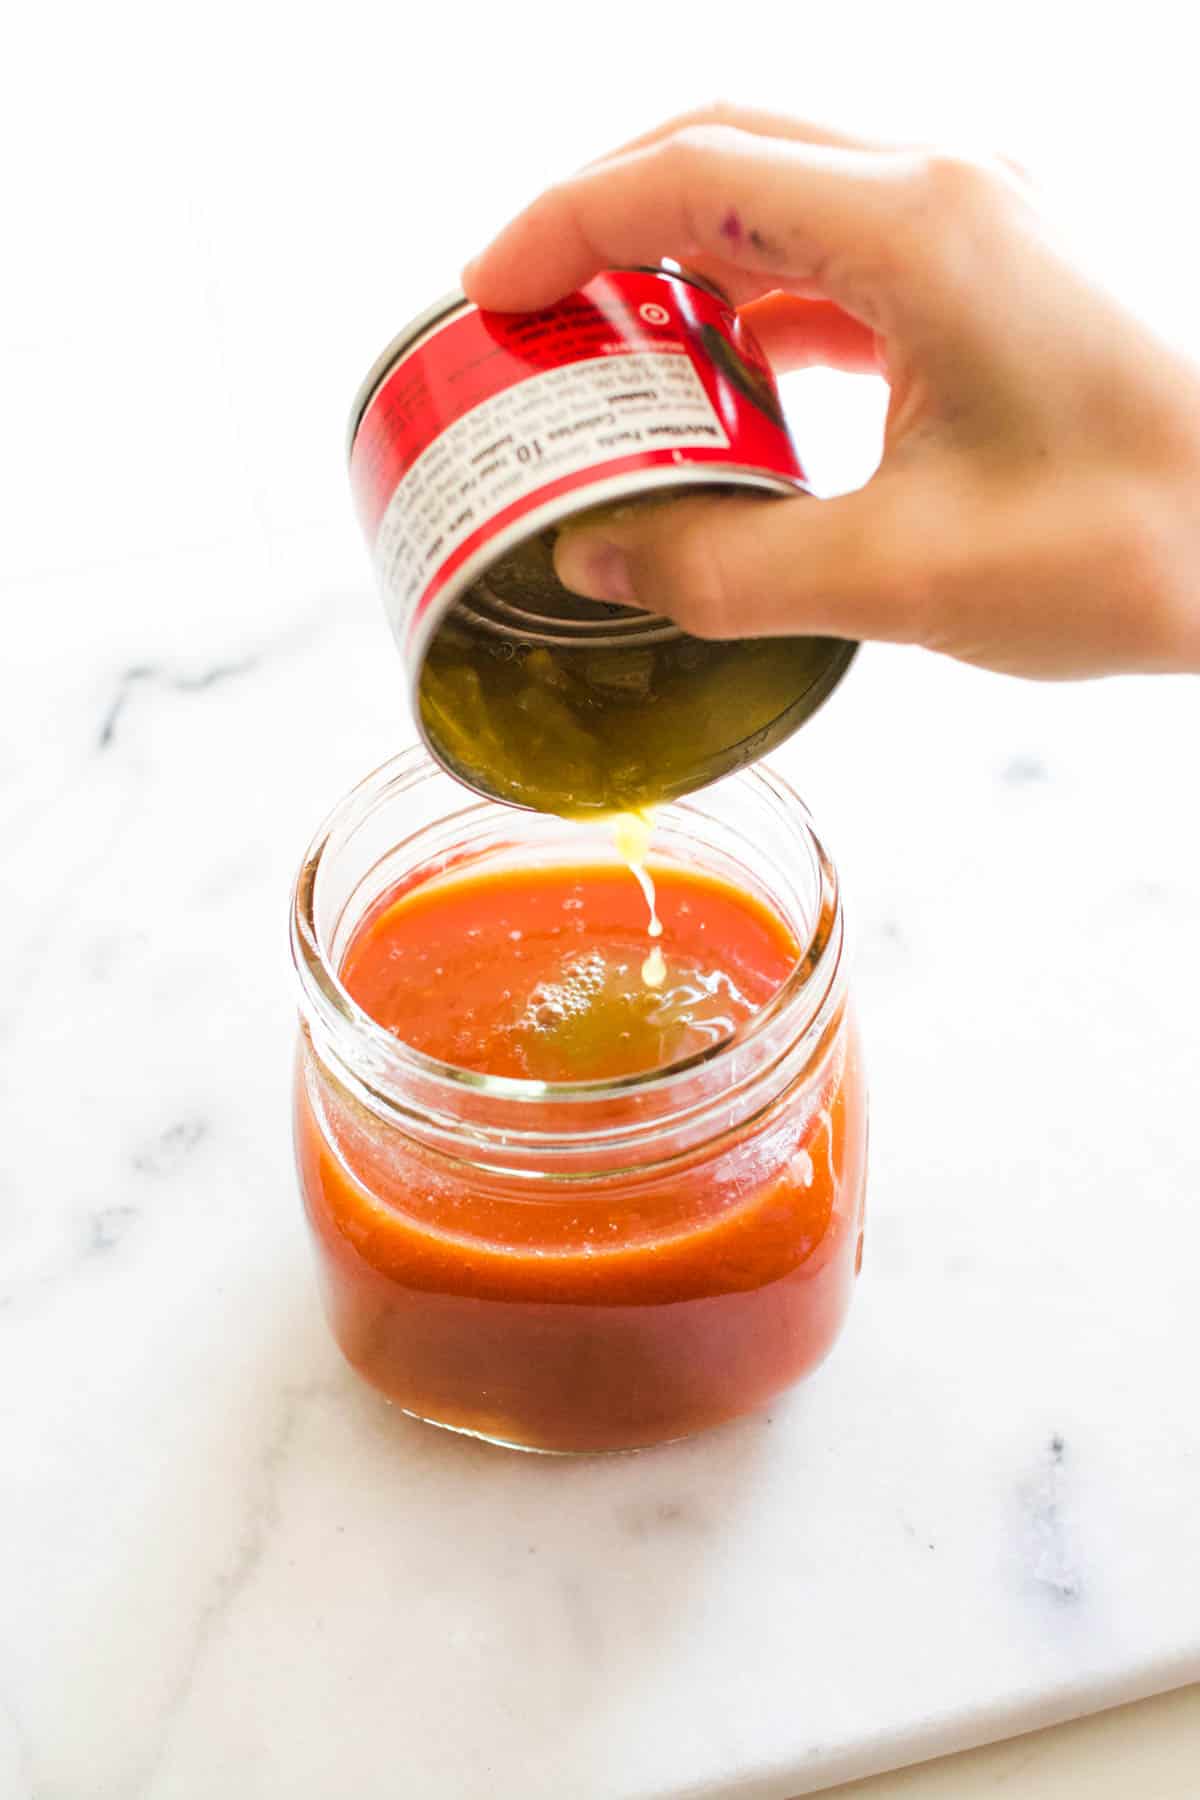 A jar of tomato juice with someone squeezing the juice from a can of green chiles into the juice.